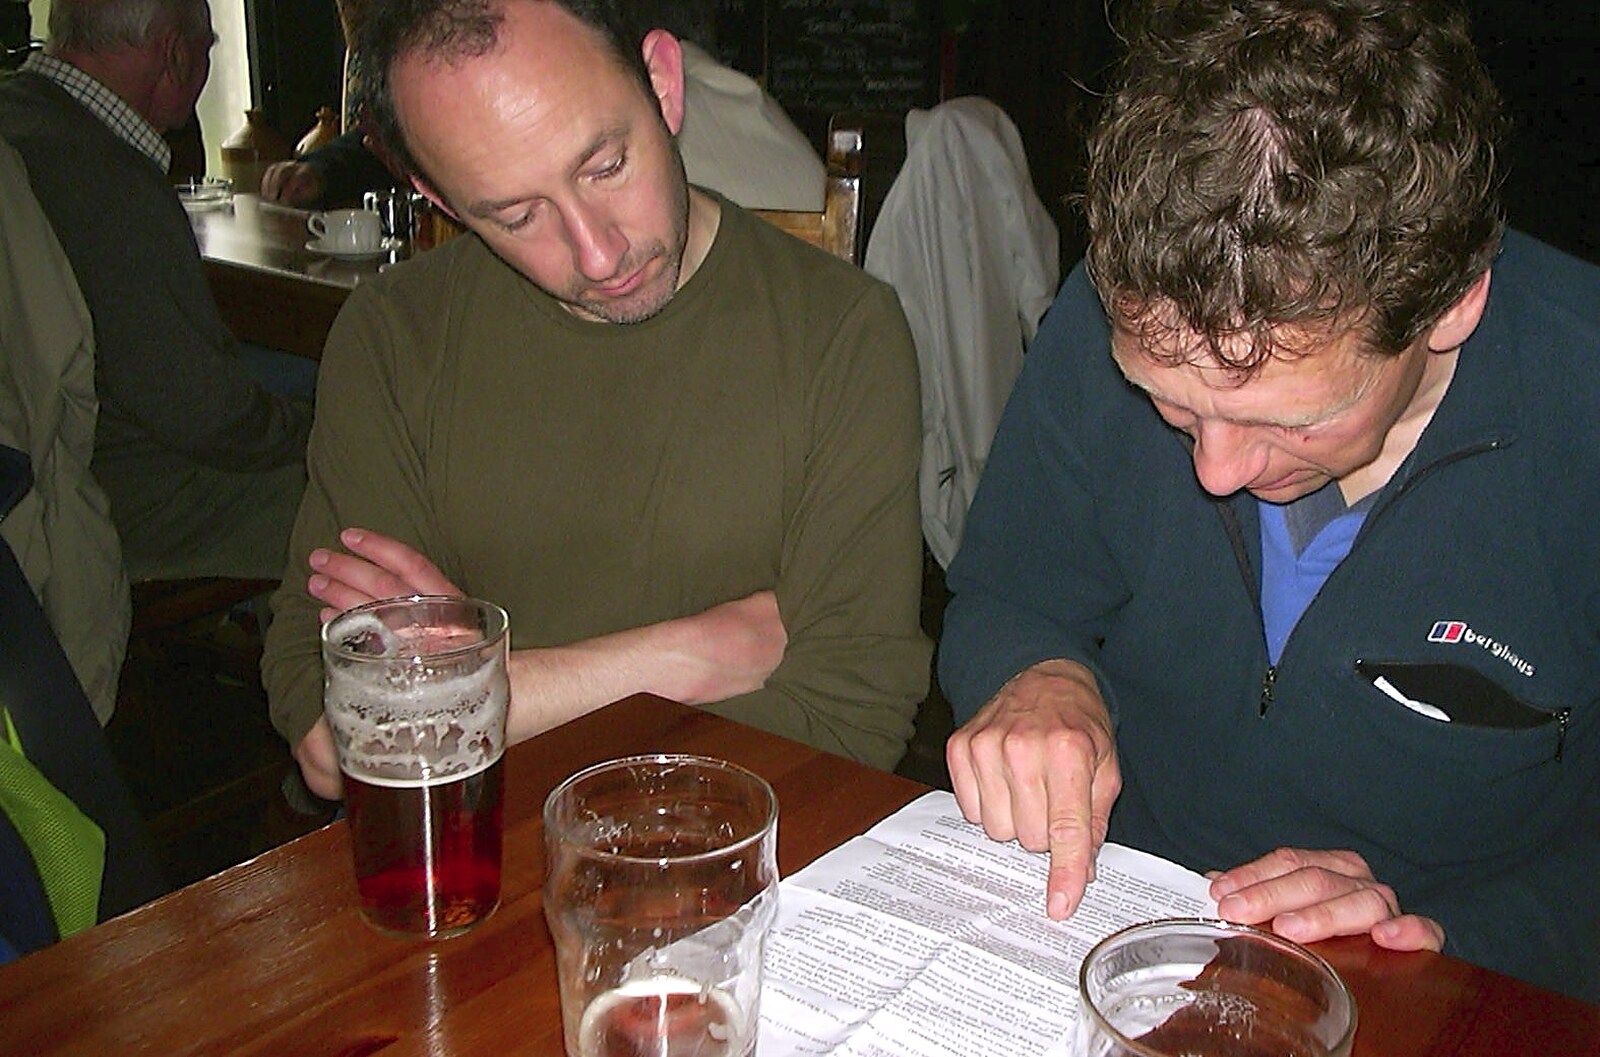 Apple checks instructions for the next section from The BSCC Annual Bike Ride, Lenham, Kent - 8th May 2004